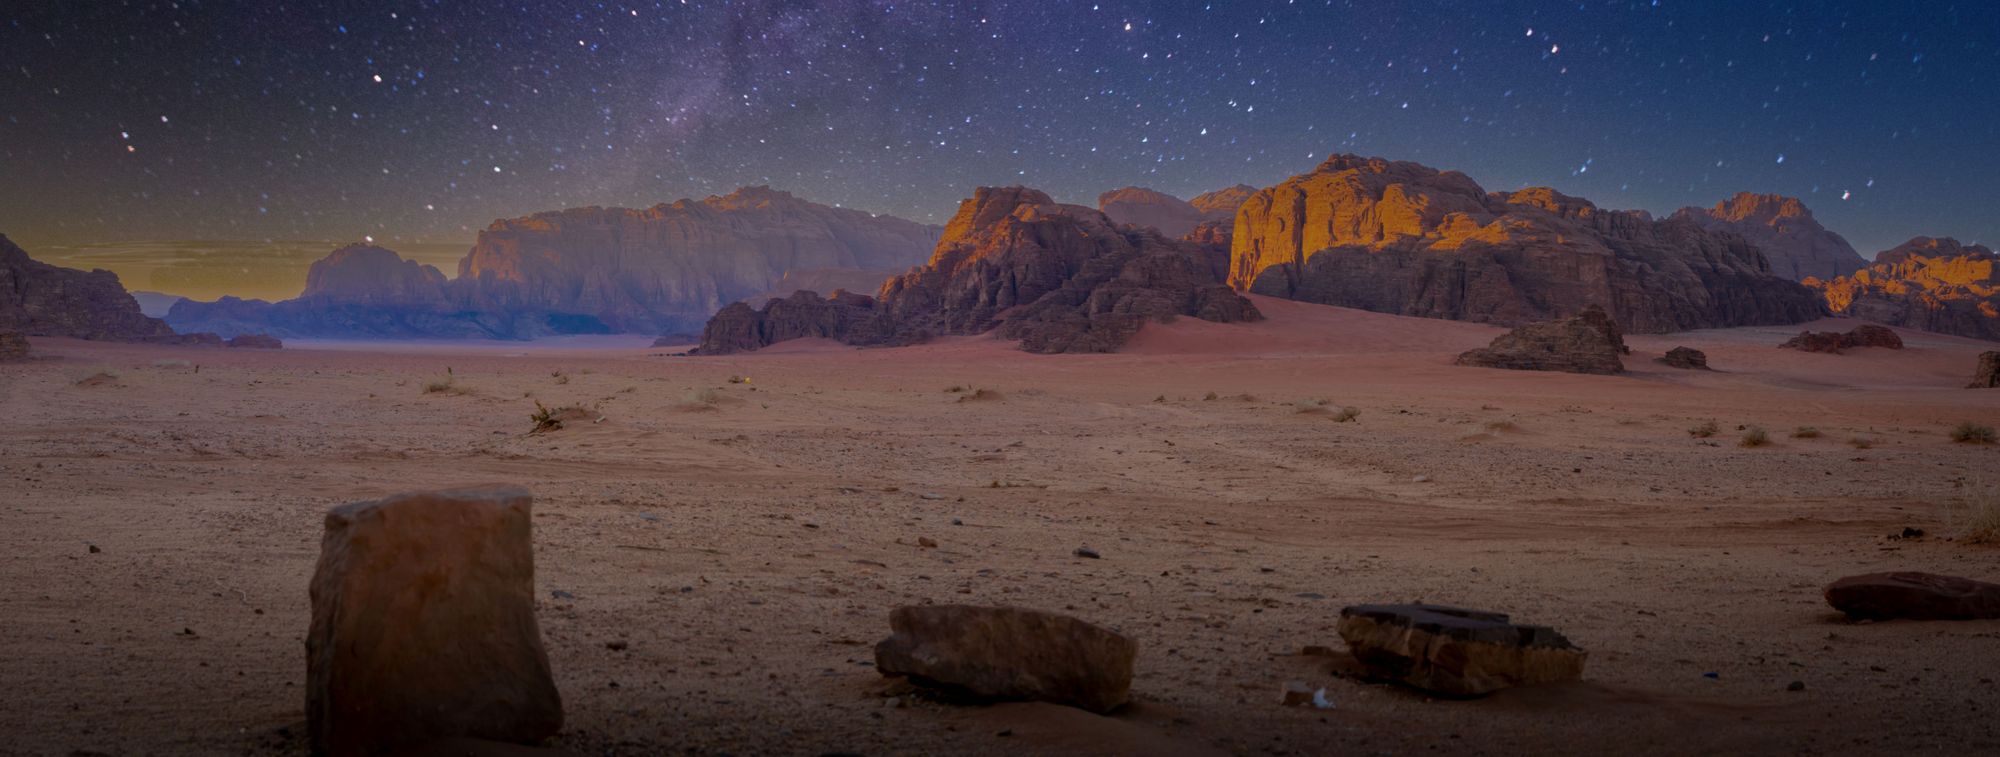 The stars sparkle over the deserts of Jordan. This is a familiar sight on the Jordan Trail. Photo: Getty